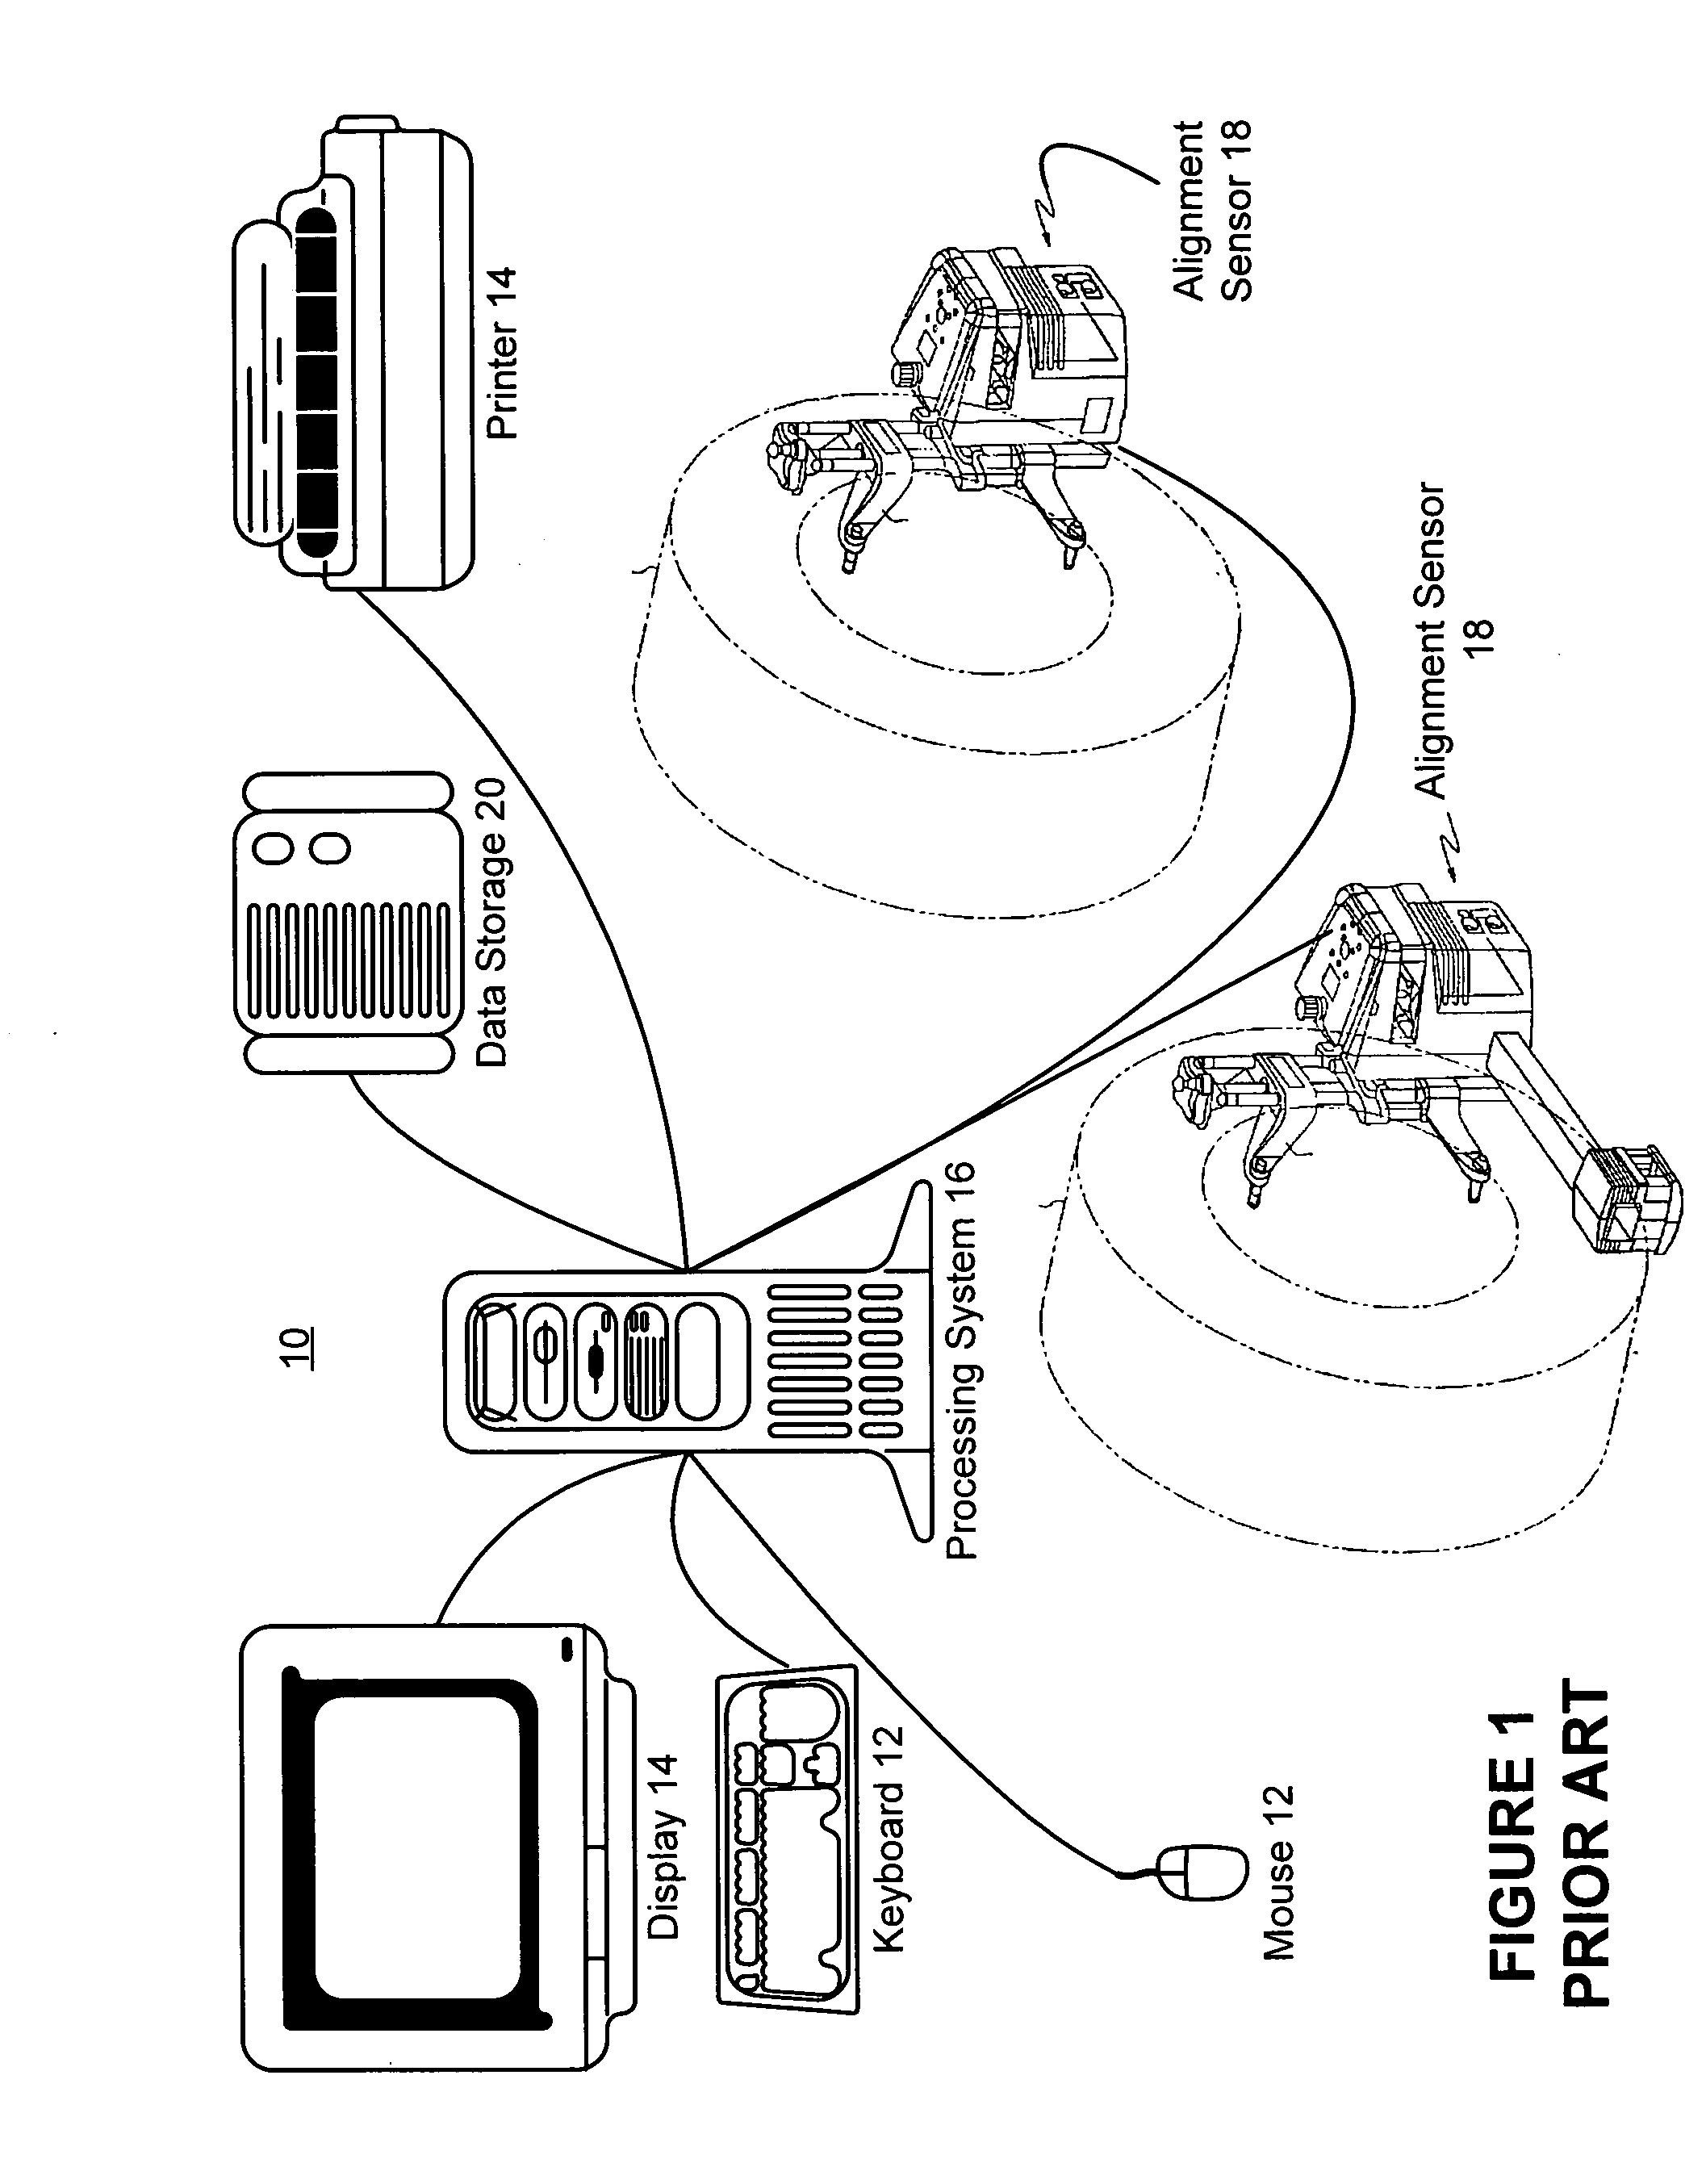 Method and apparatus for wireless networks in wheel alignment systems